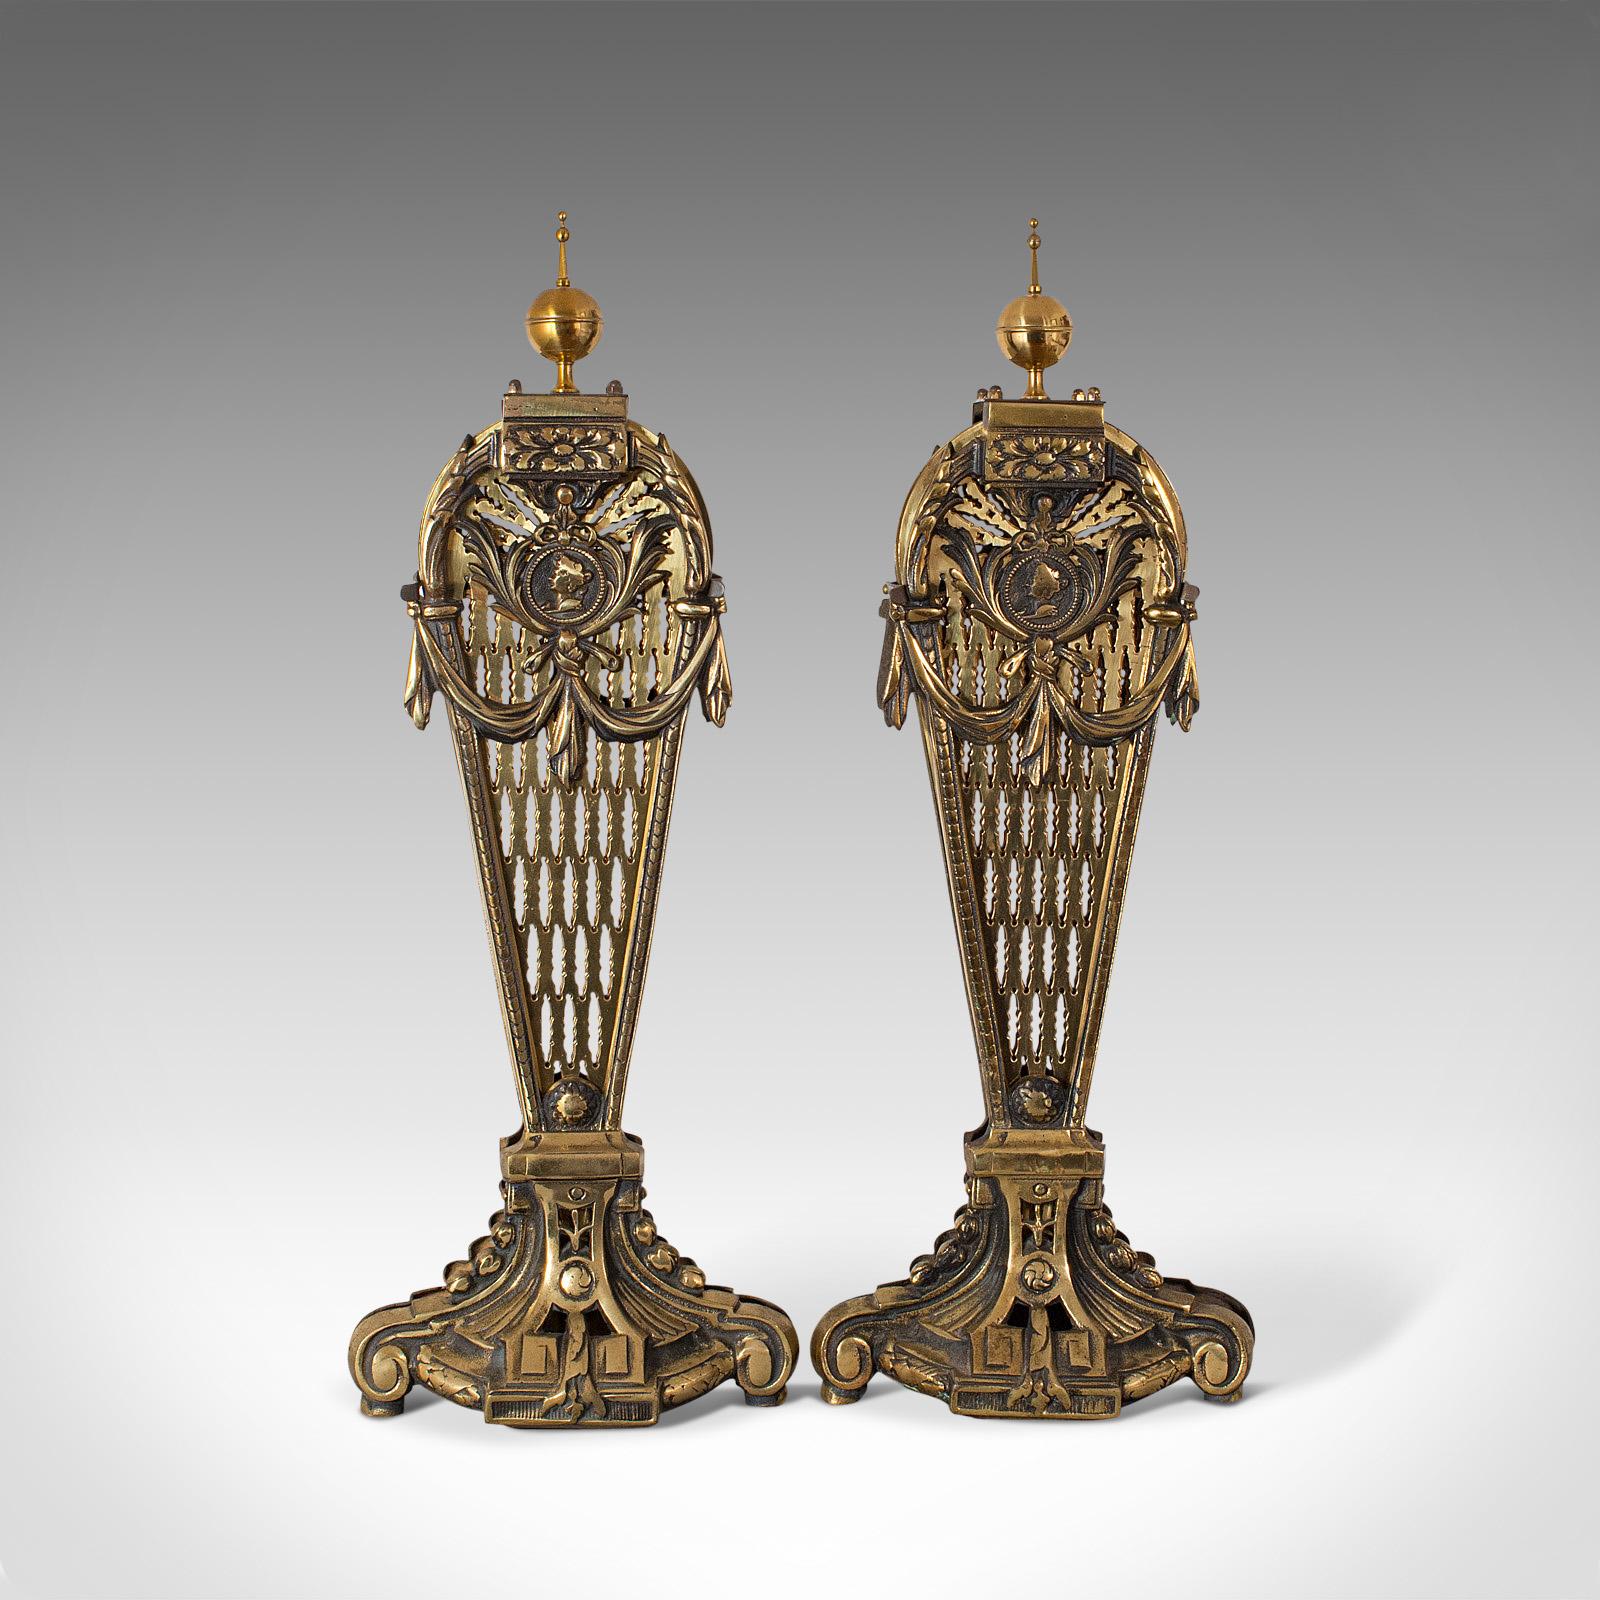 19th Century Rare, Pair of Antique Peacock Fire Screens, English, Brass, Fireside, Victorian